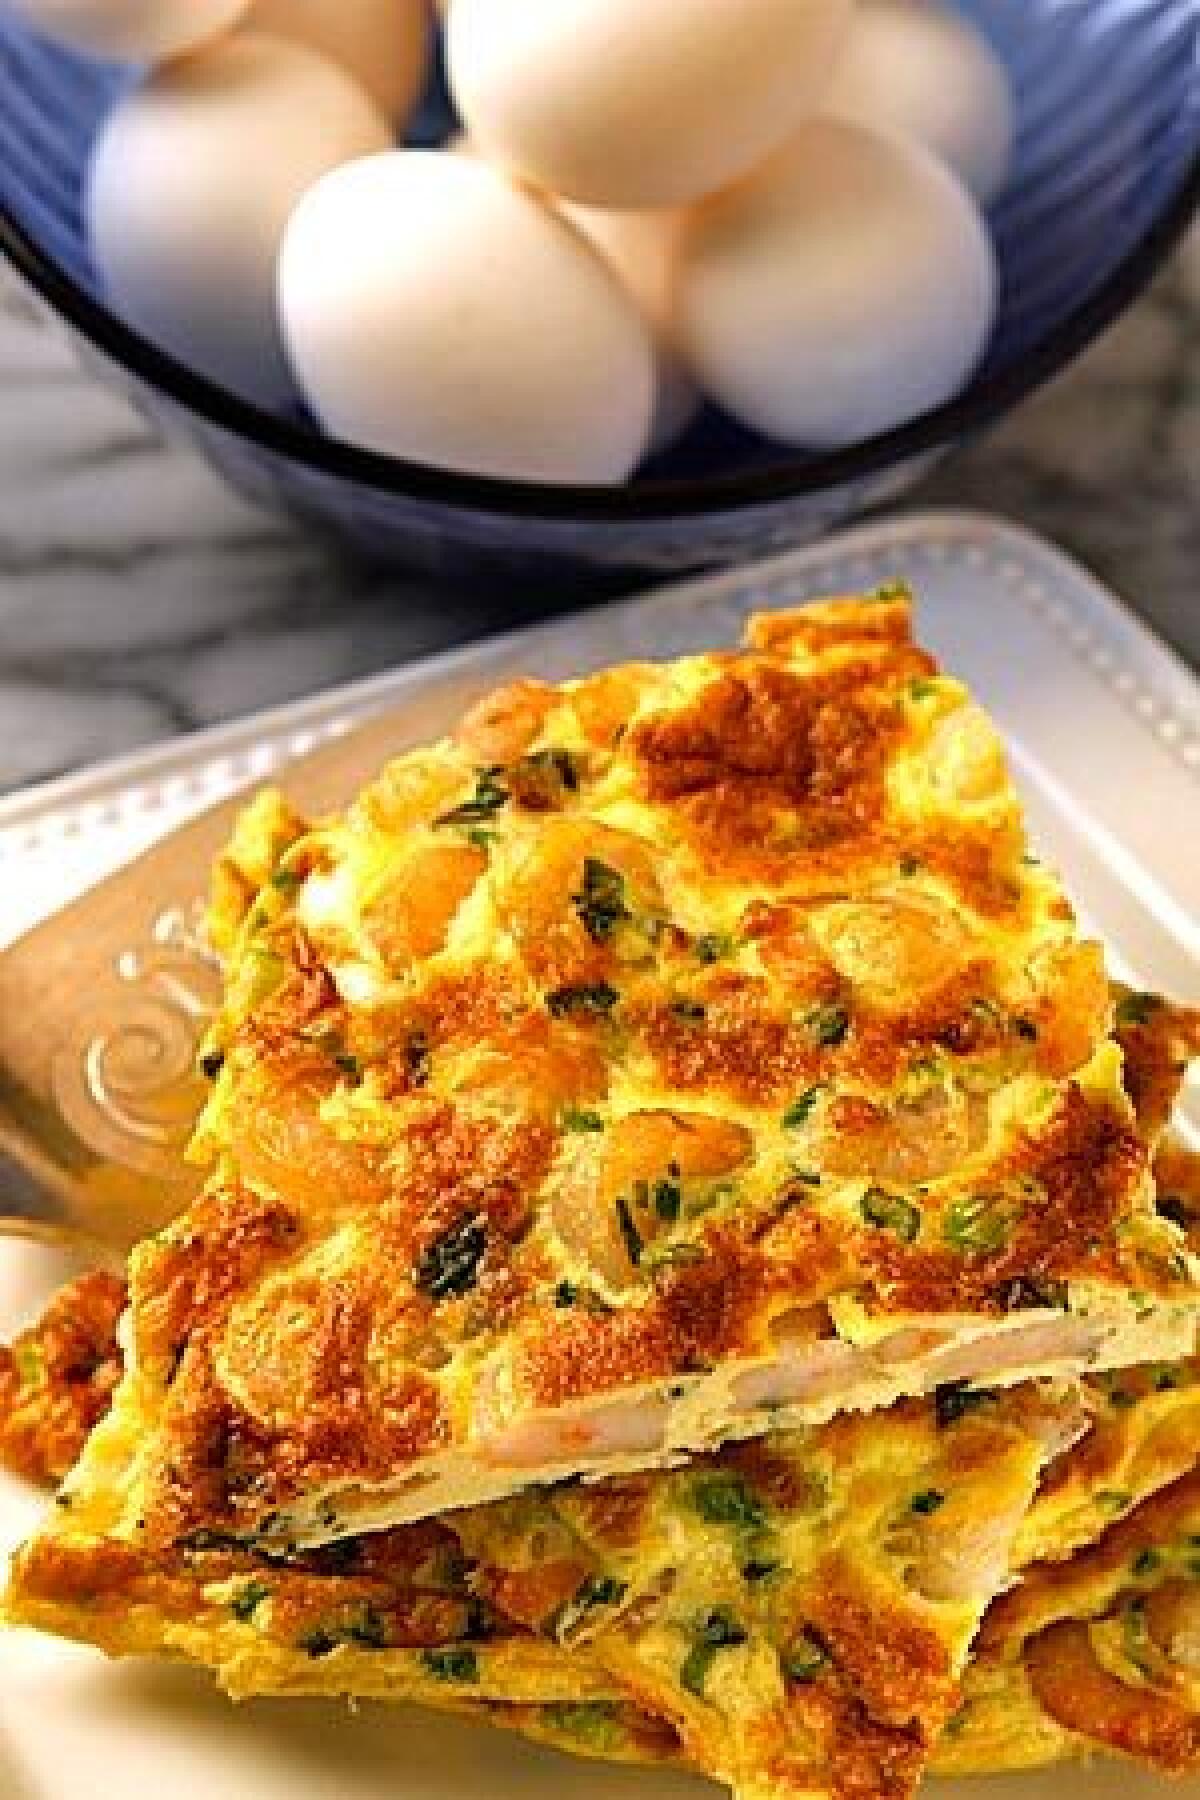 The shrimp and basil frittata is a snap to make and is one of the tastiest variations.